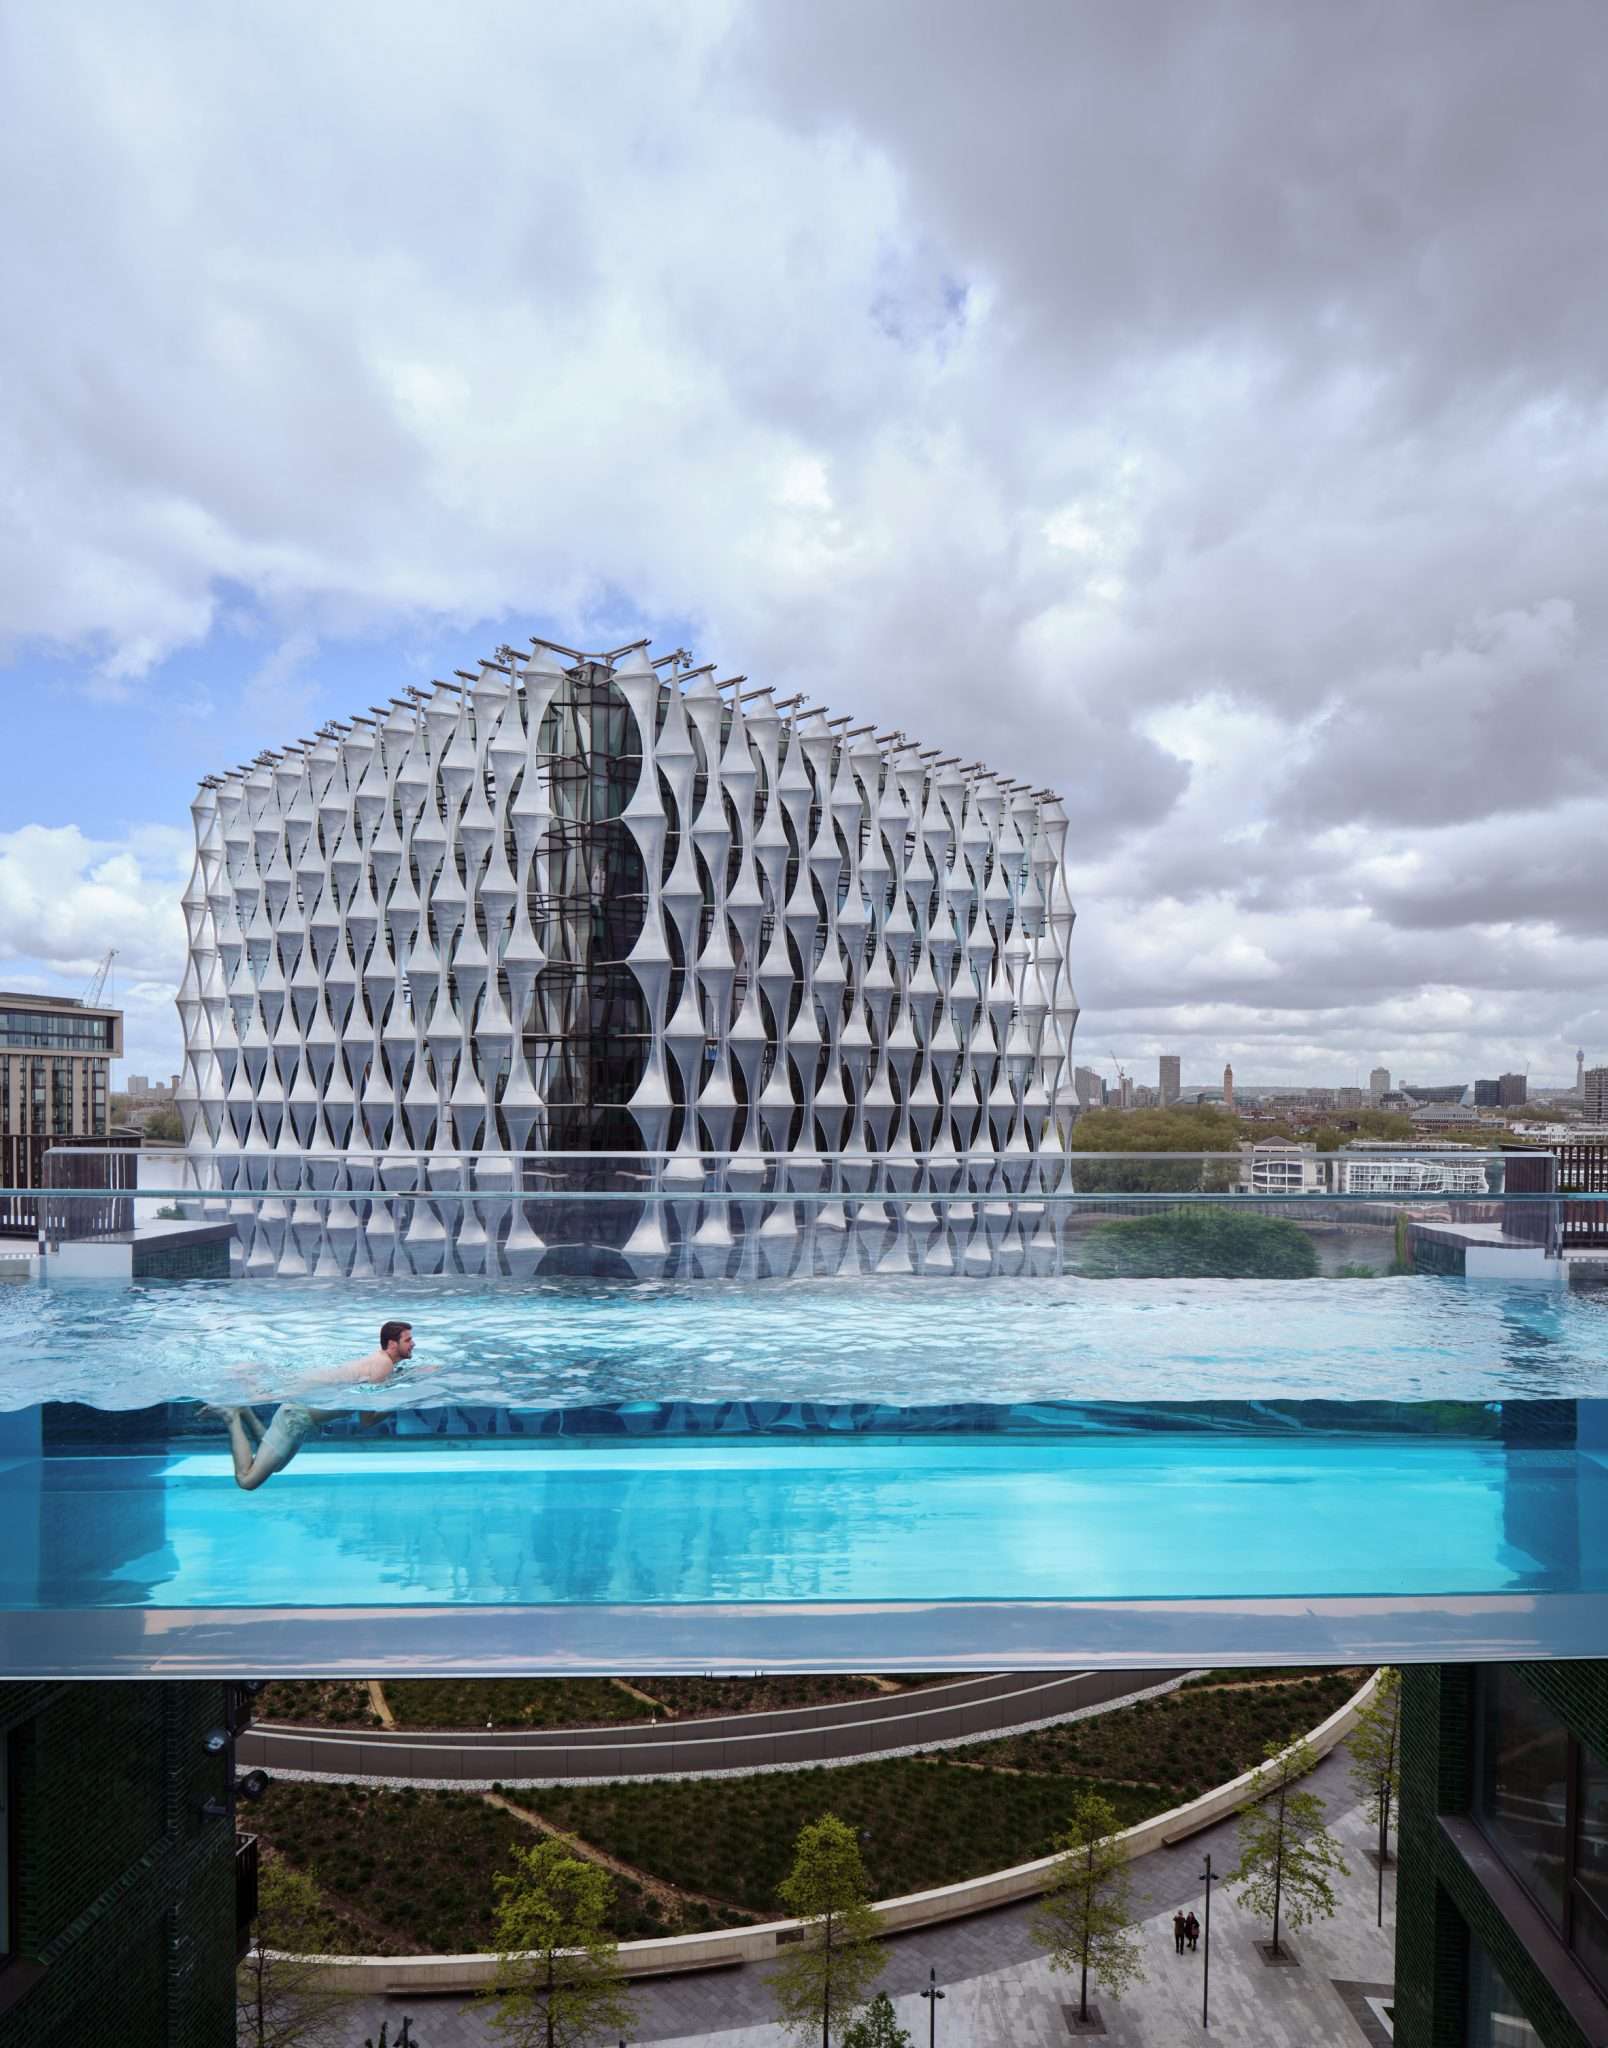 The World’s First “Levitating” Pool Placed Between Two Skyscrapers In London